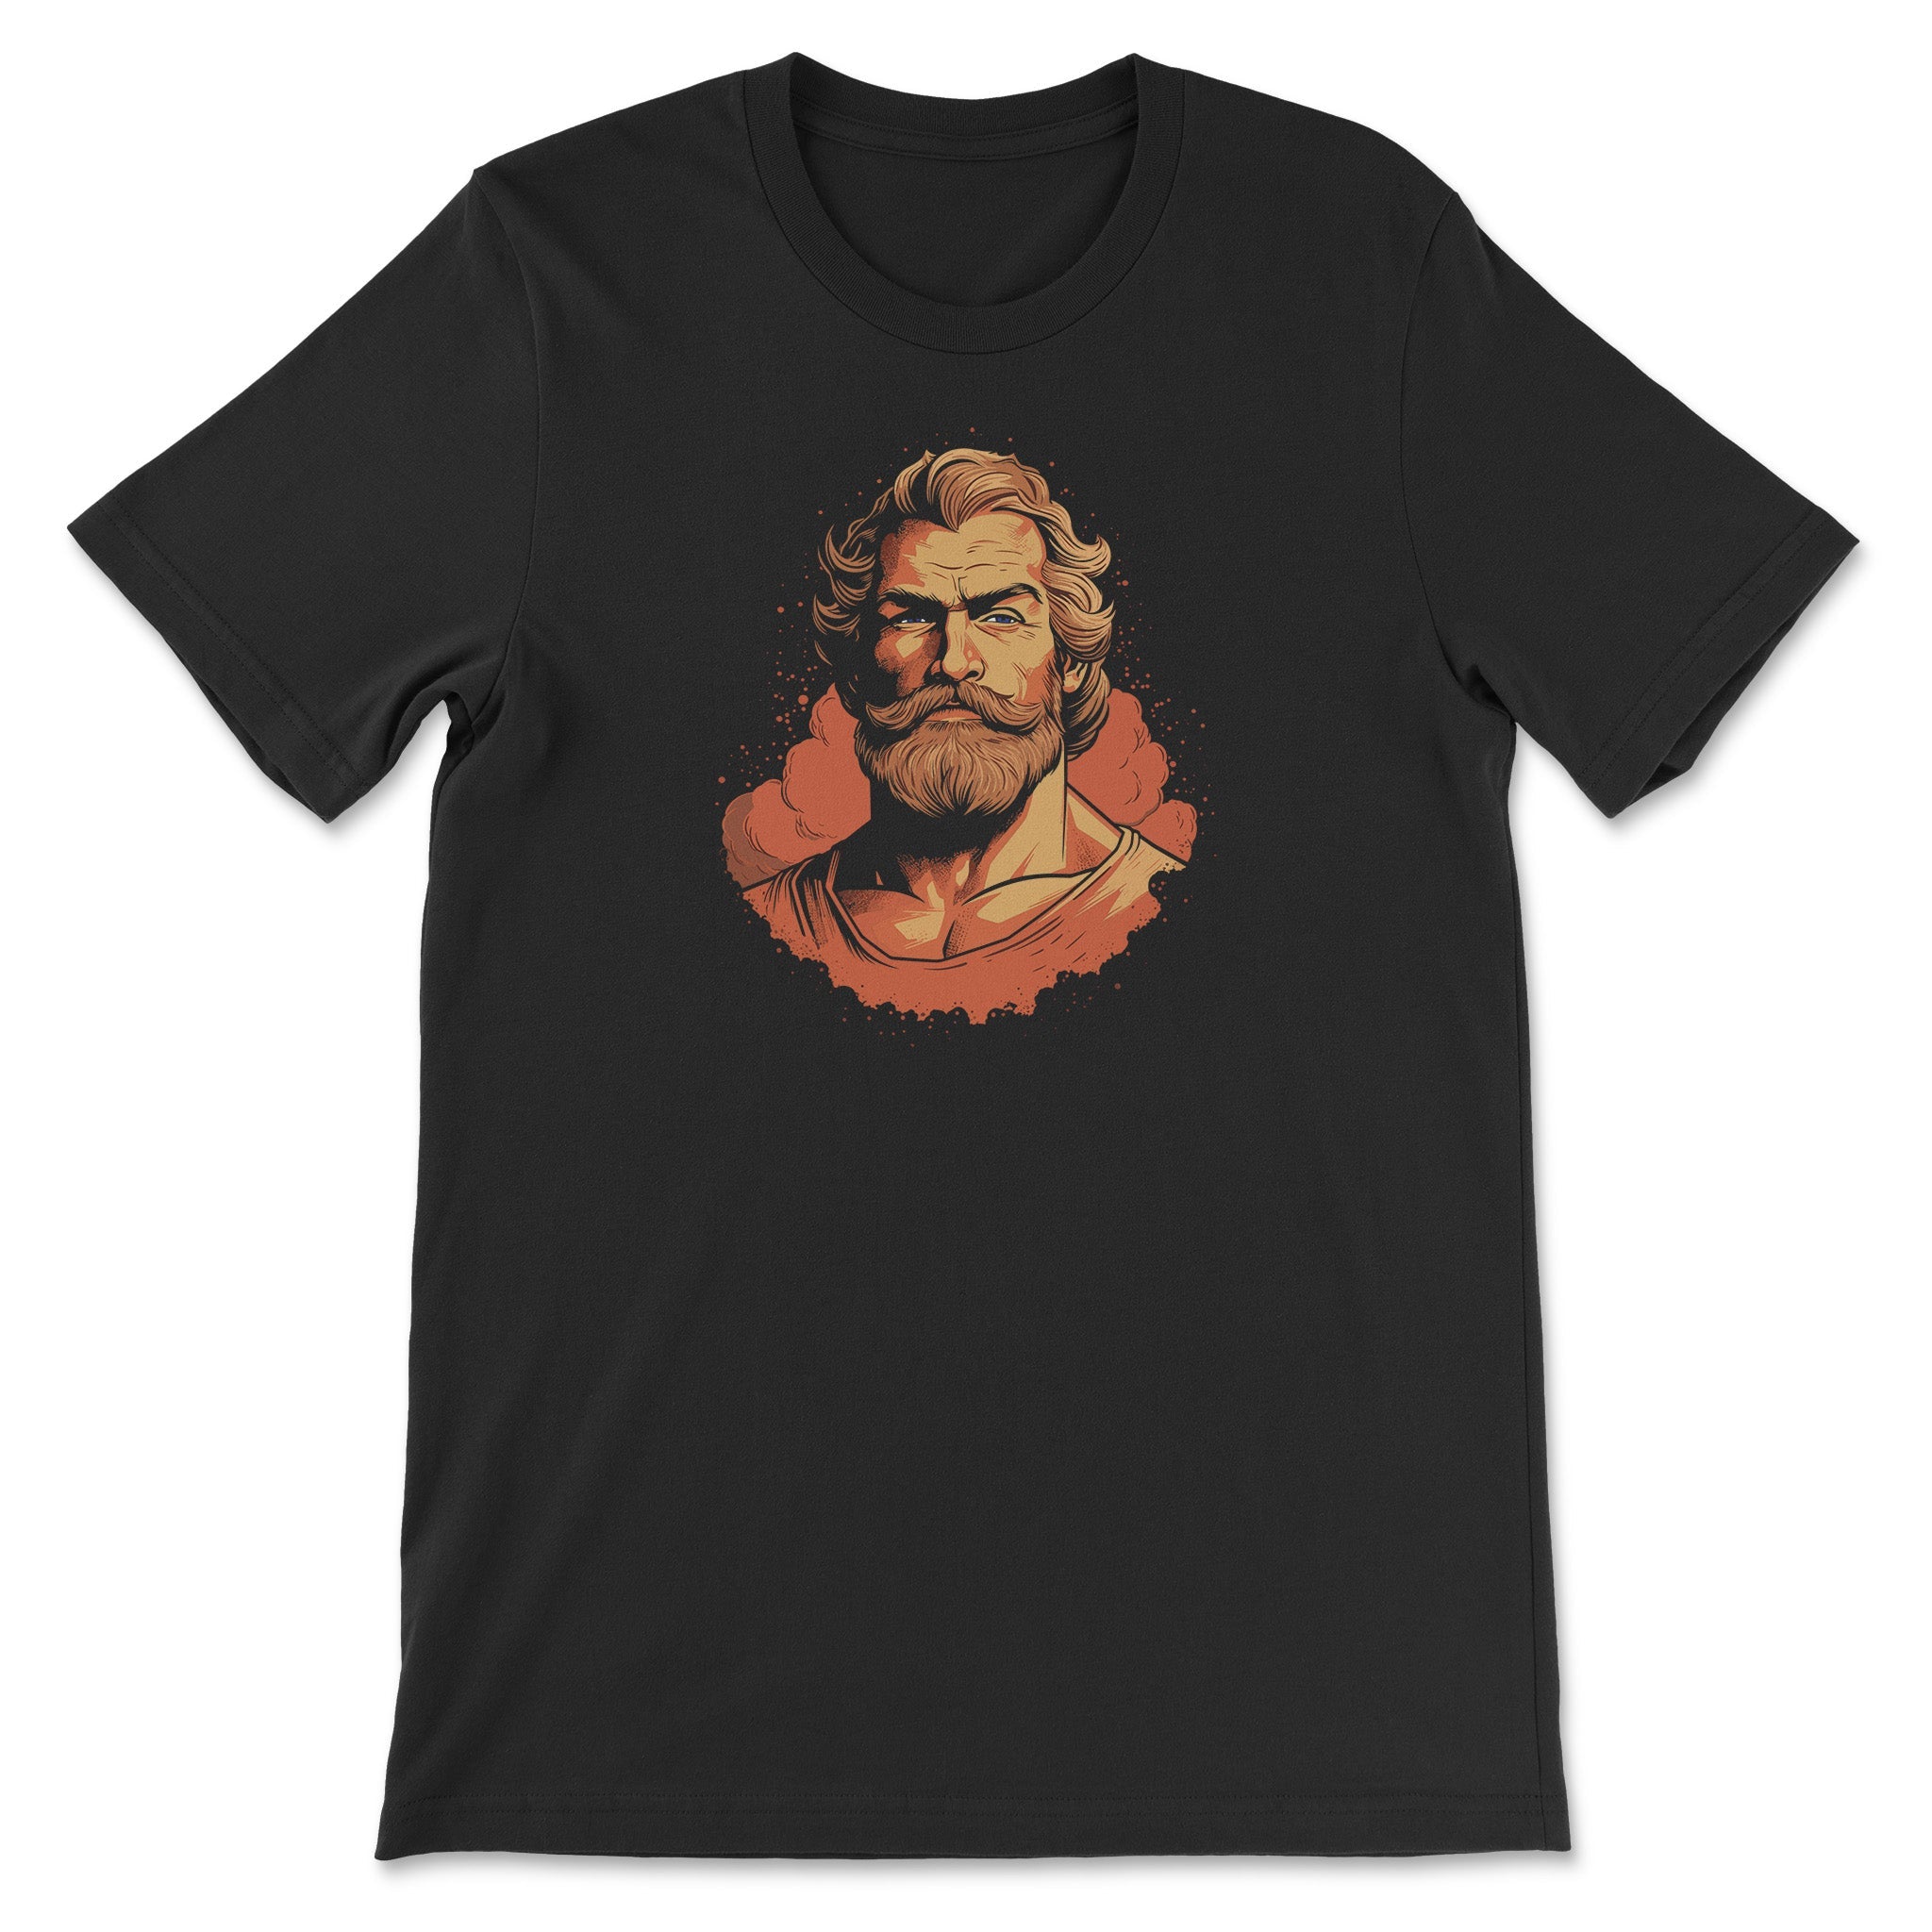 "Dream Daddy" T-Shirt - Celebrating Masculinity and Charisma - Hunky Tops